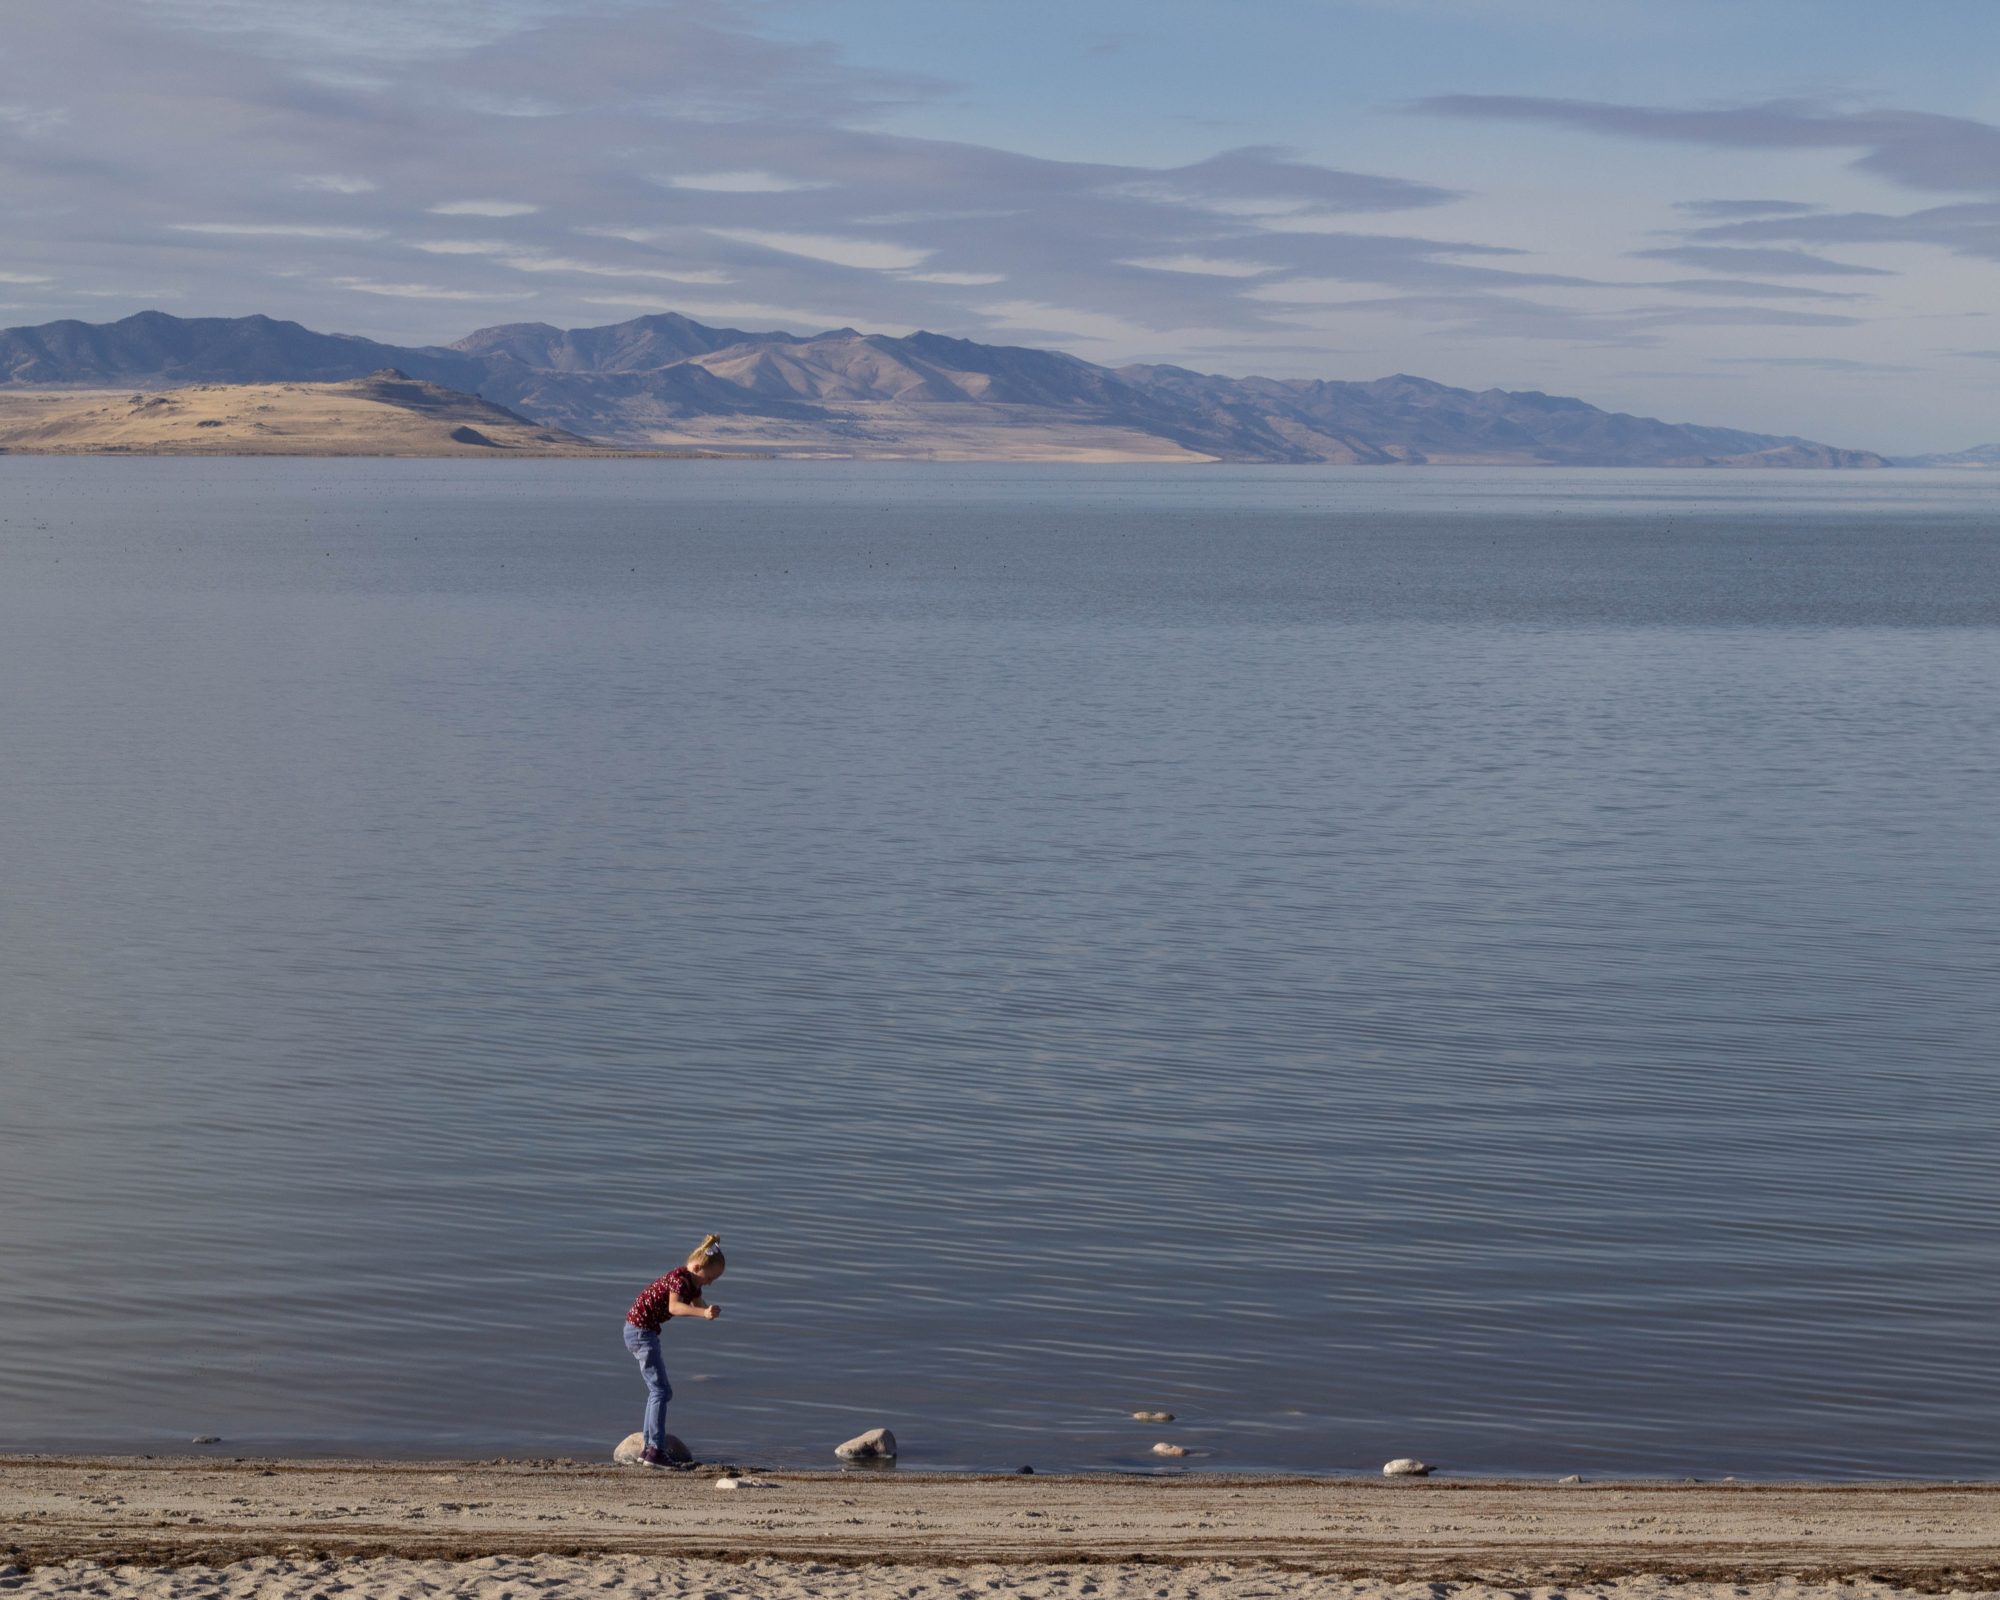 The Utah Lake Restoration Project wants to put islands on Utah Lake. But how will it effect the environment and the water quality?